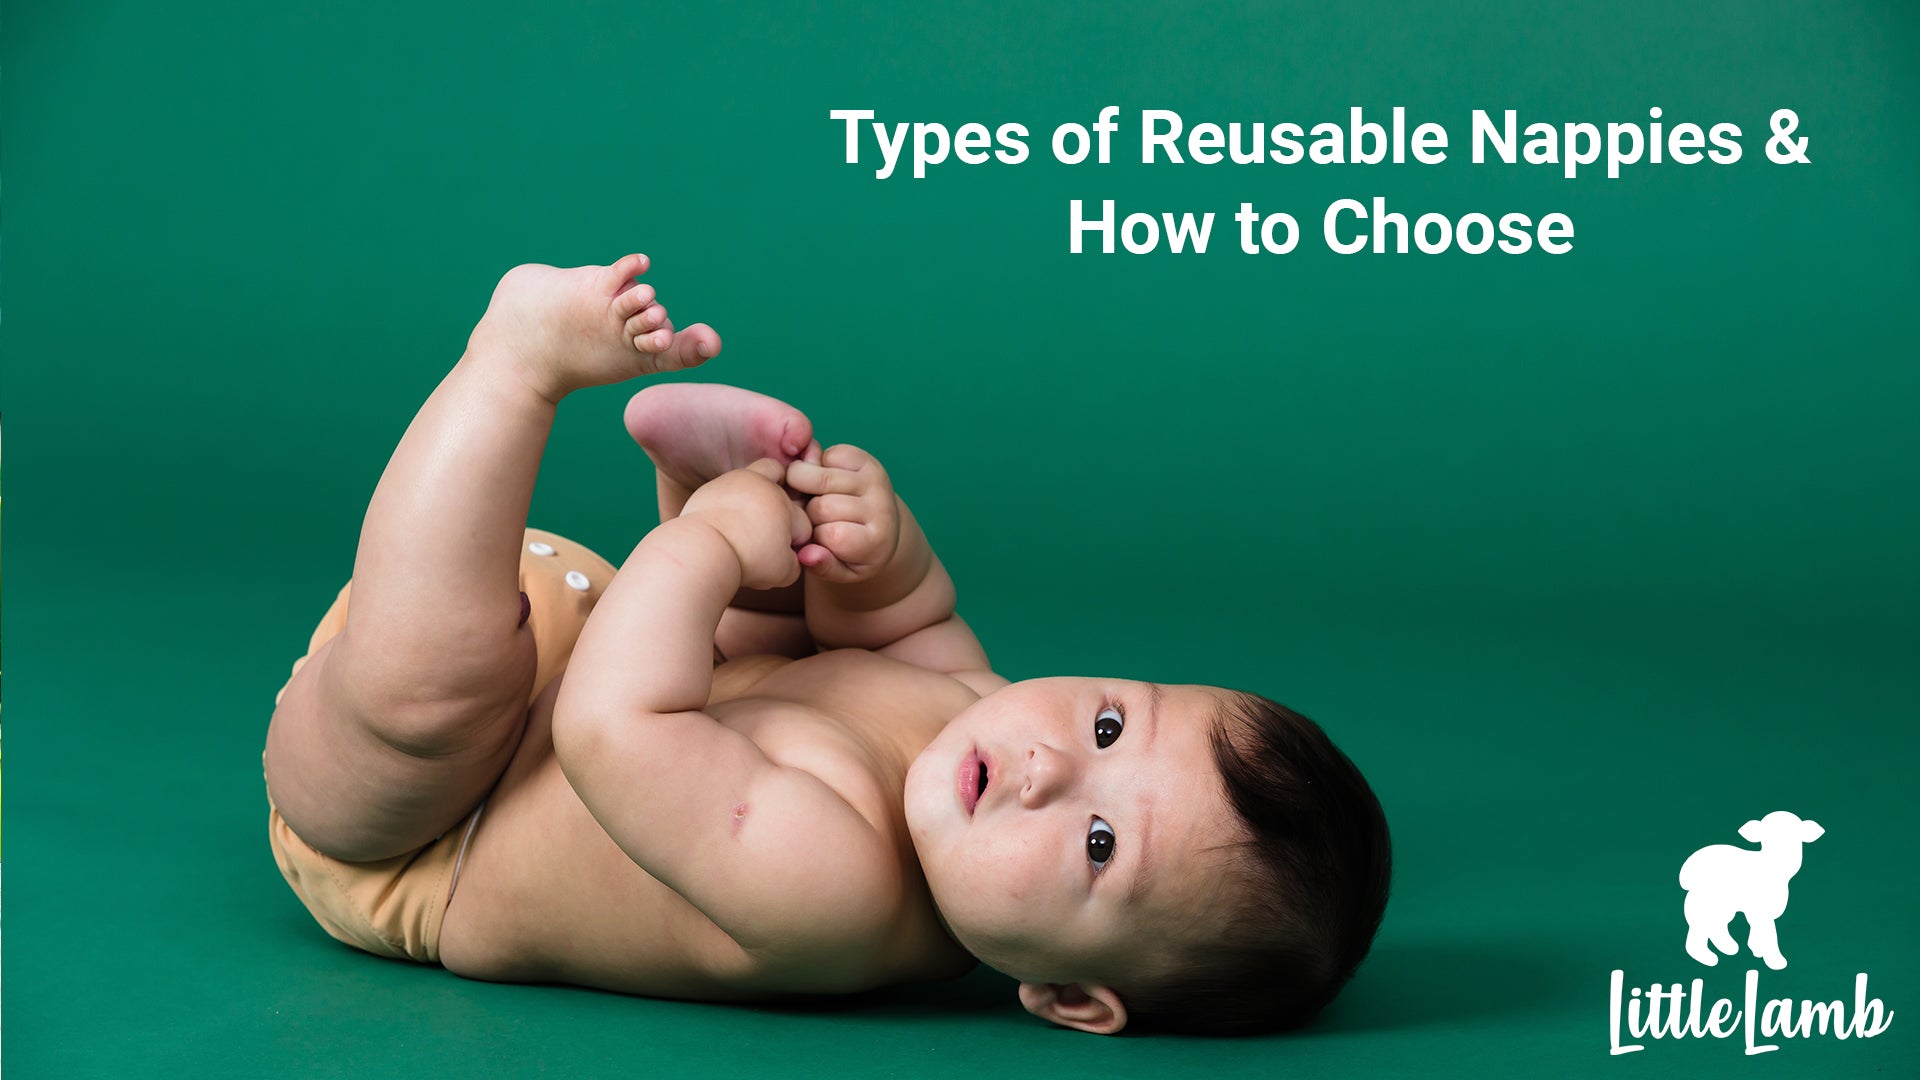 Types of reusable nappies and how to choose